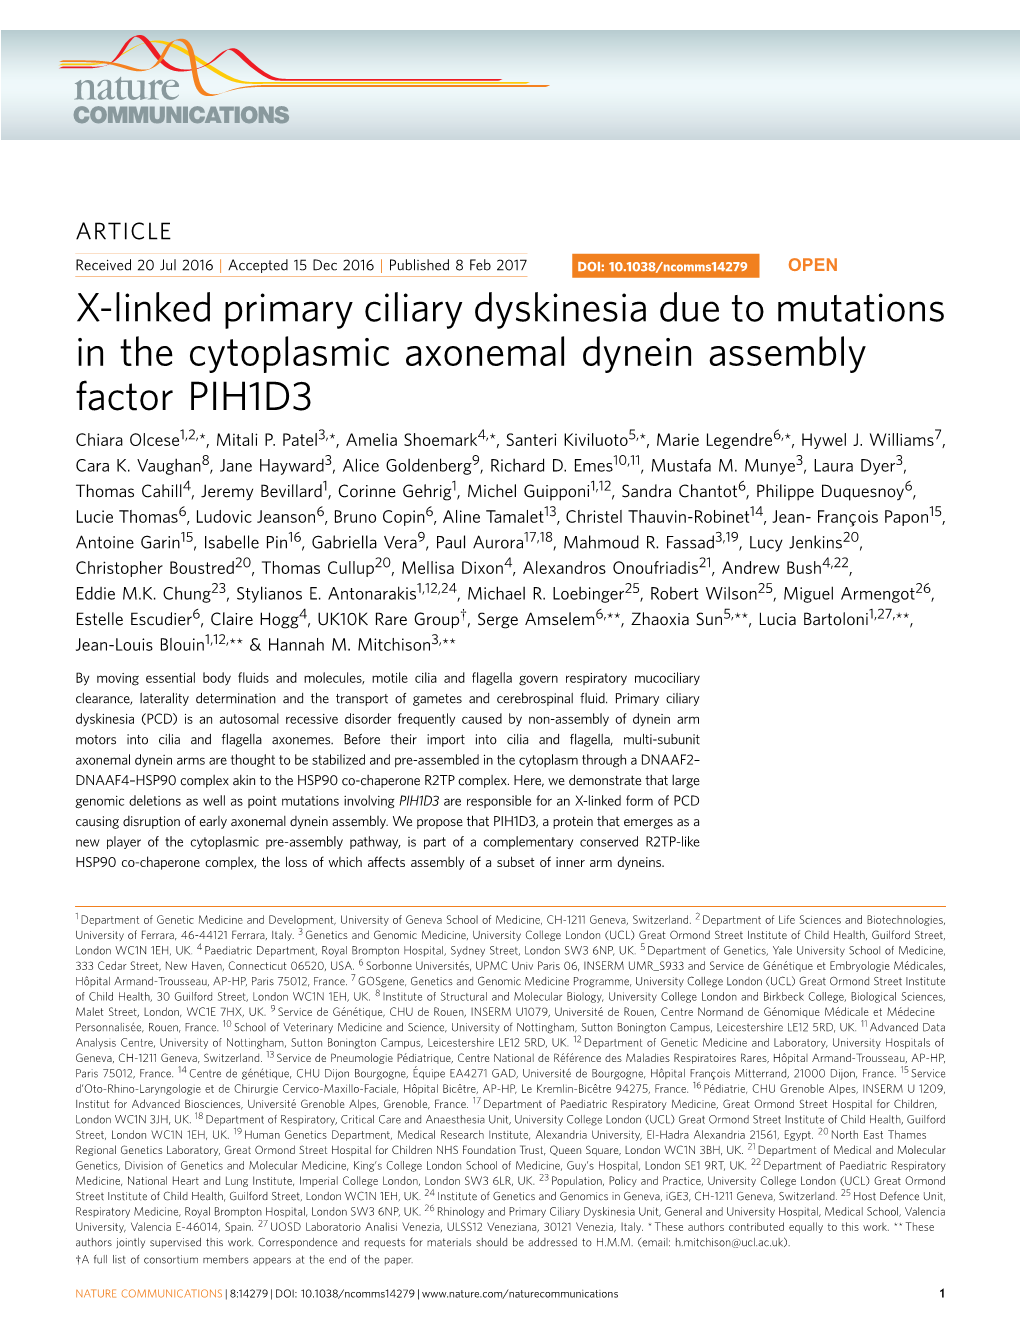 X-Linked Primary Ciliary Dyskinesia Due to Mutations in the Cytoplasmic Axonemal Dynein Assembly Factor PIH1D3 Chiara Olcese1,2,*, Mitali P